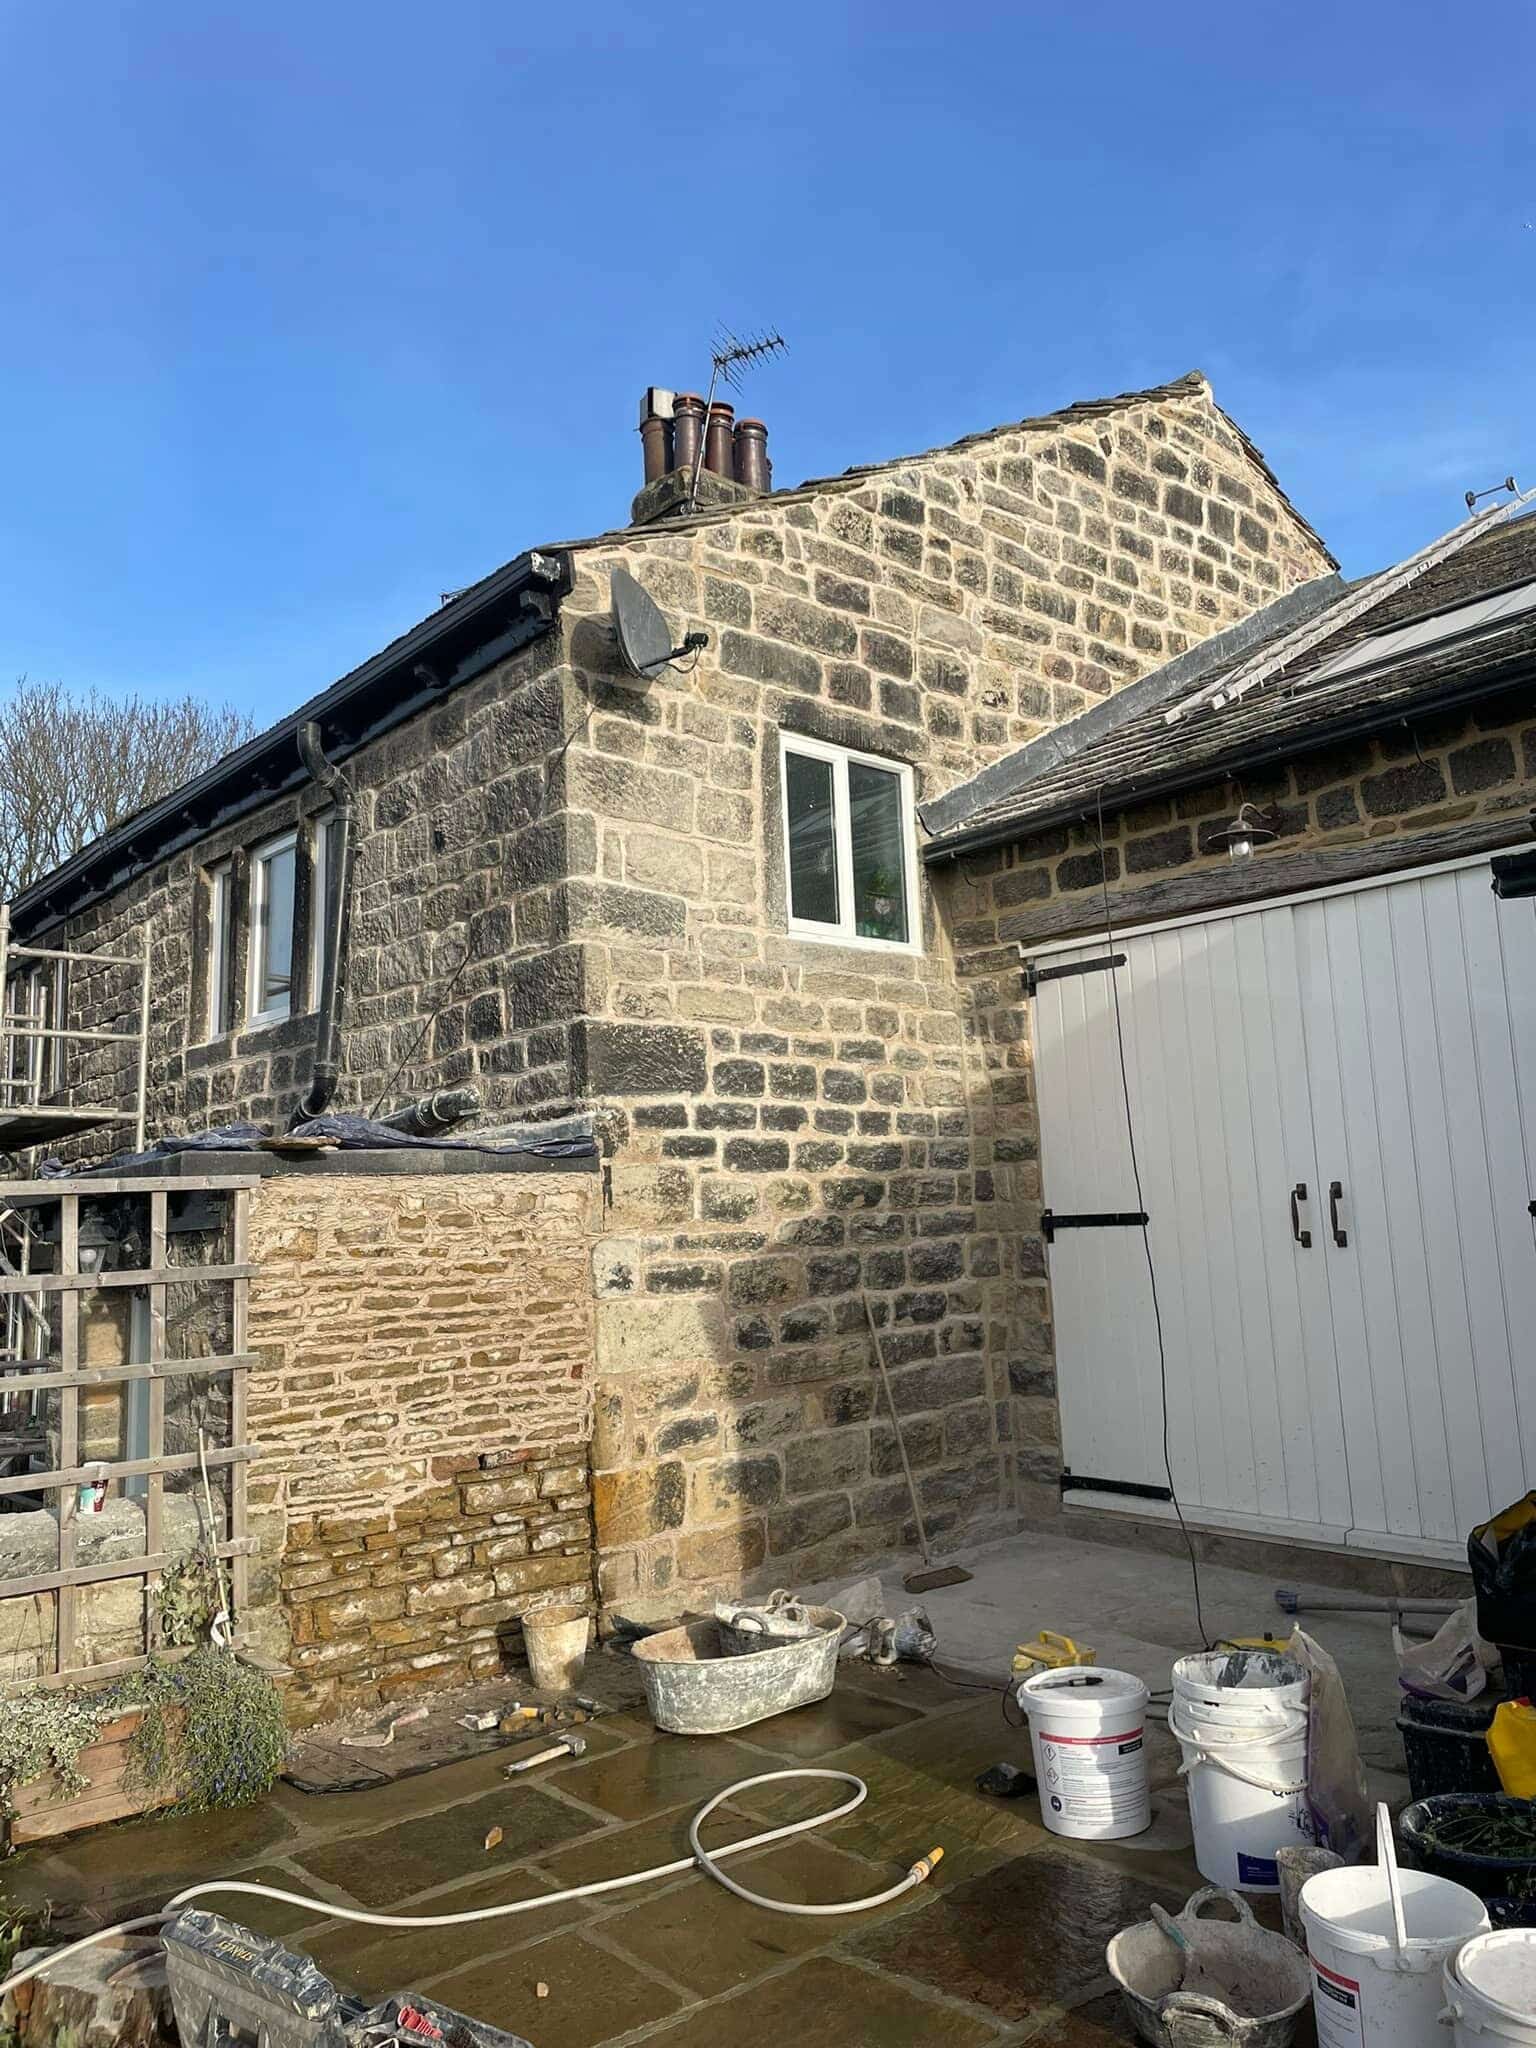 Restoring 2 cottages in yeadon using lime mortar for pointing in Leeds,West Yorkshire